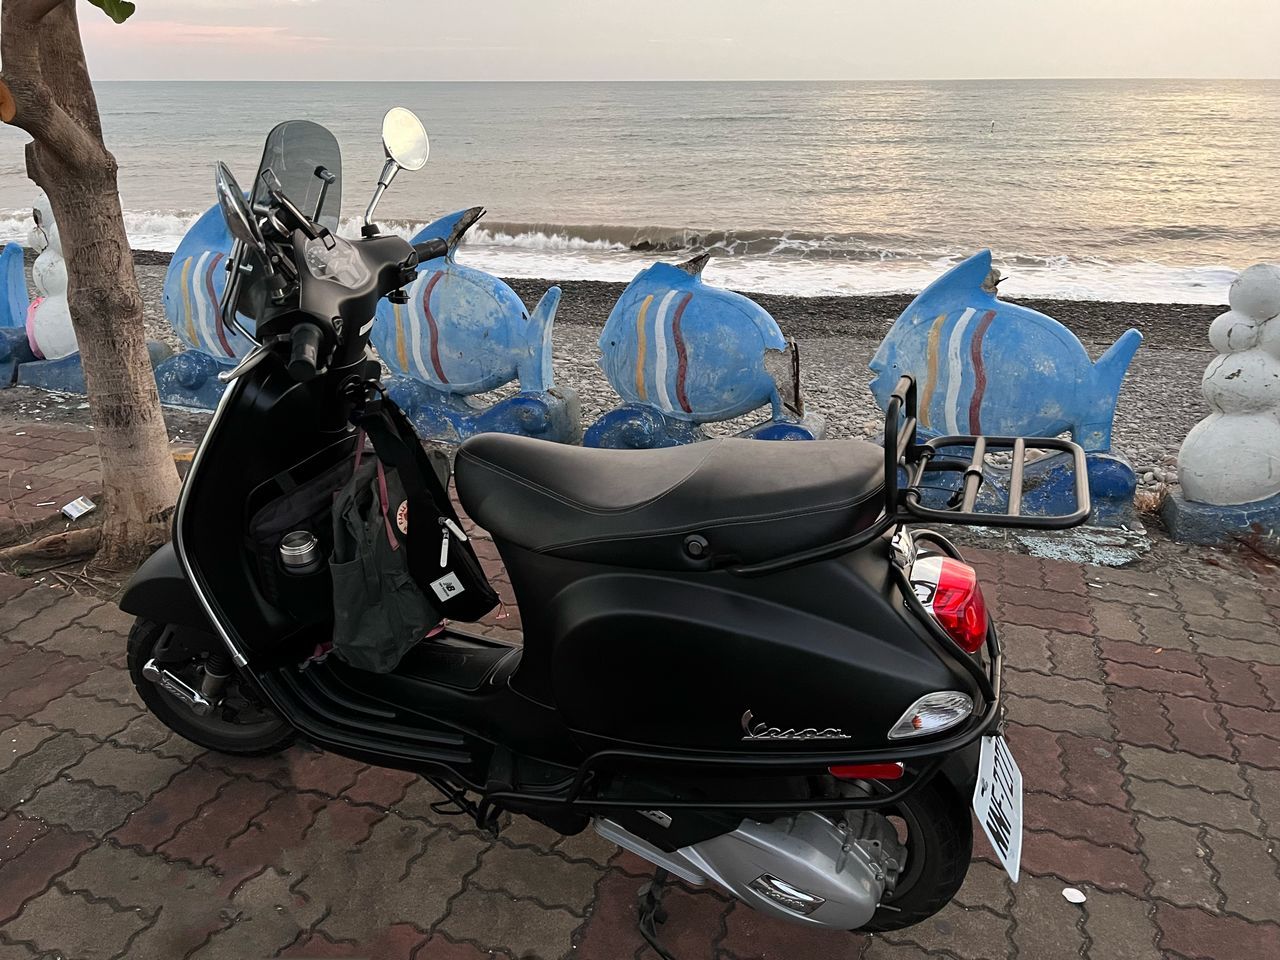 sea, water, transportation, mode of transportation, vehicle, travel, beach, nature, sky, motorcycle, land vehicle, land, horizon over water, scooter, day, travel destinations, vacation, trip, outdoors, horizon, holiday, car, motorcycling, sports, no people, scenics - nature